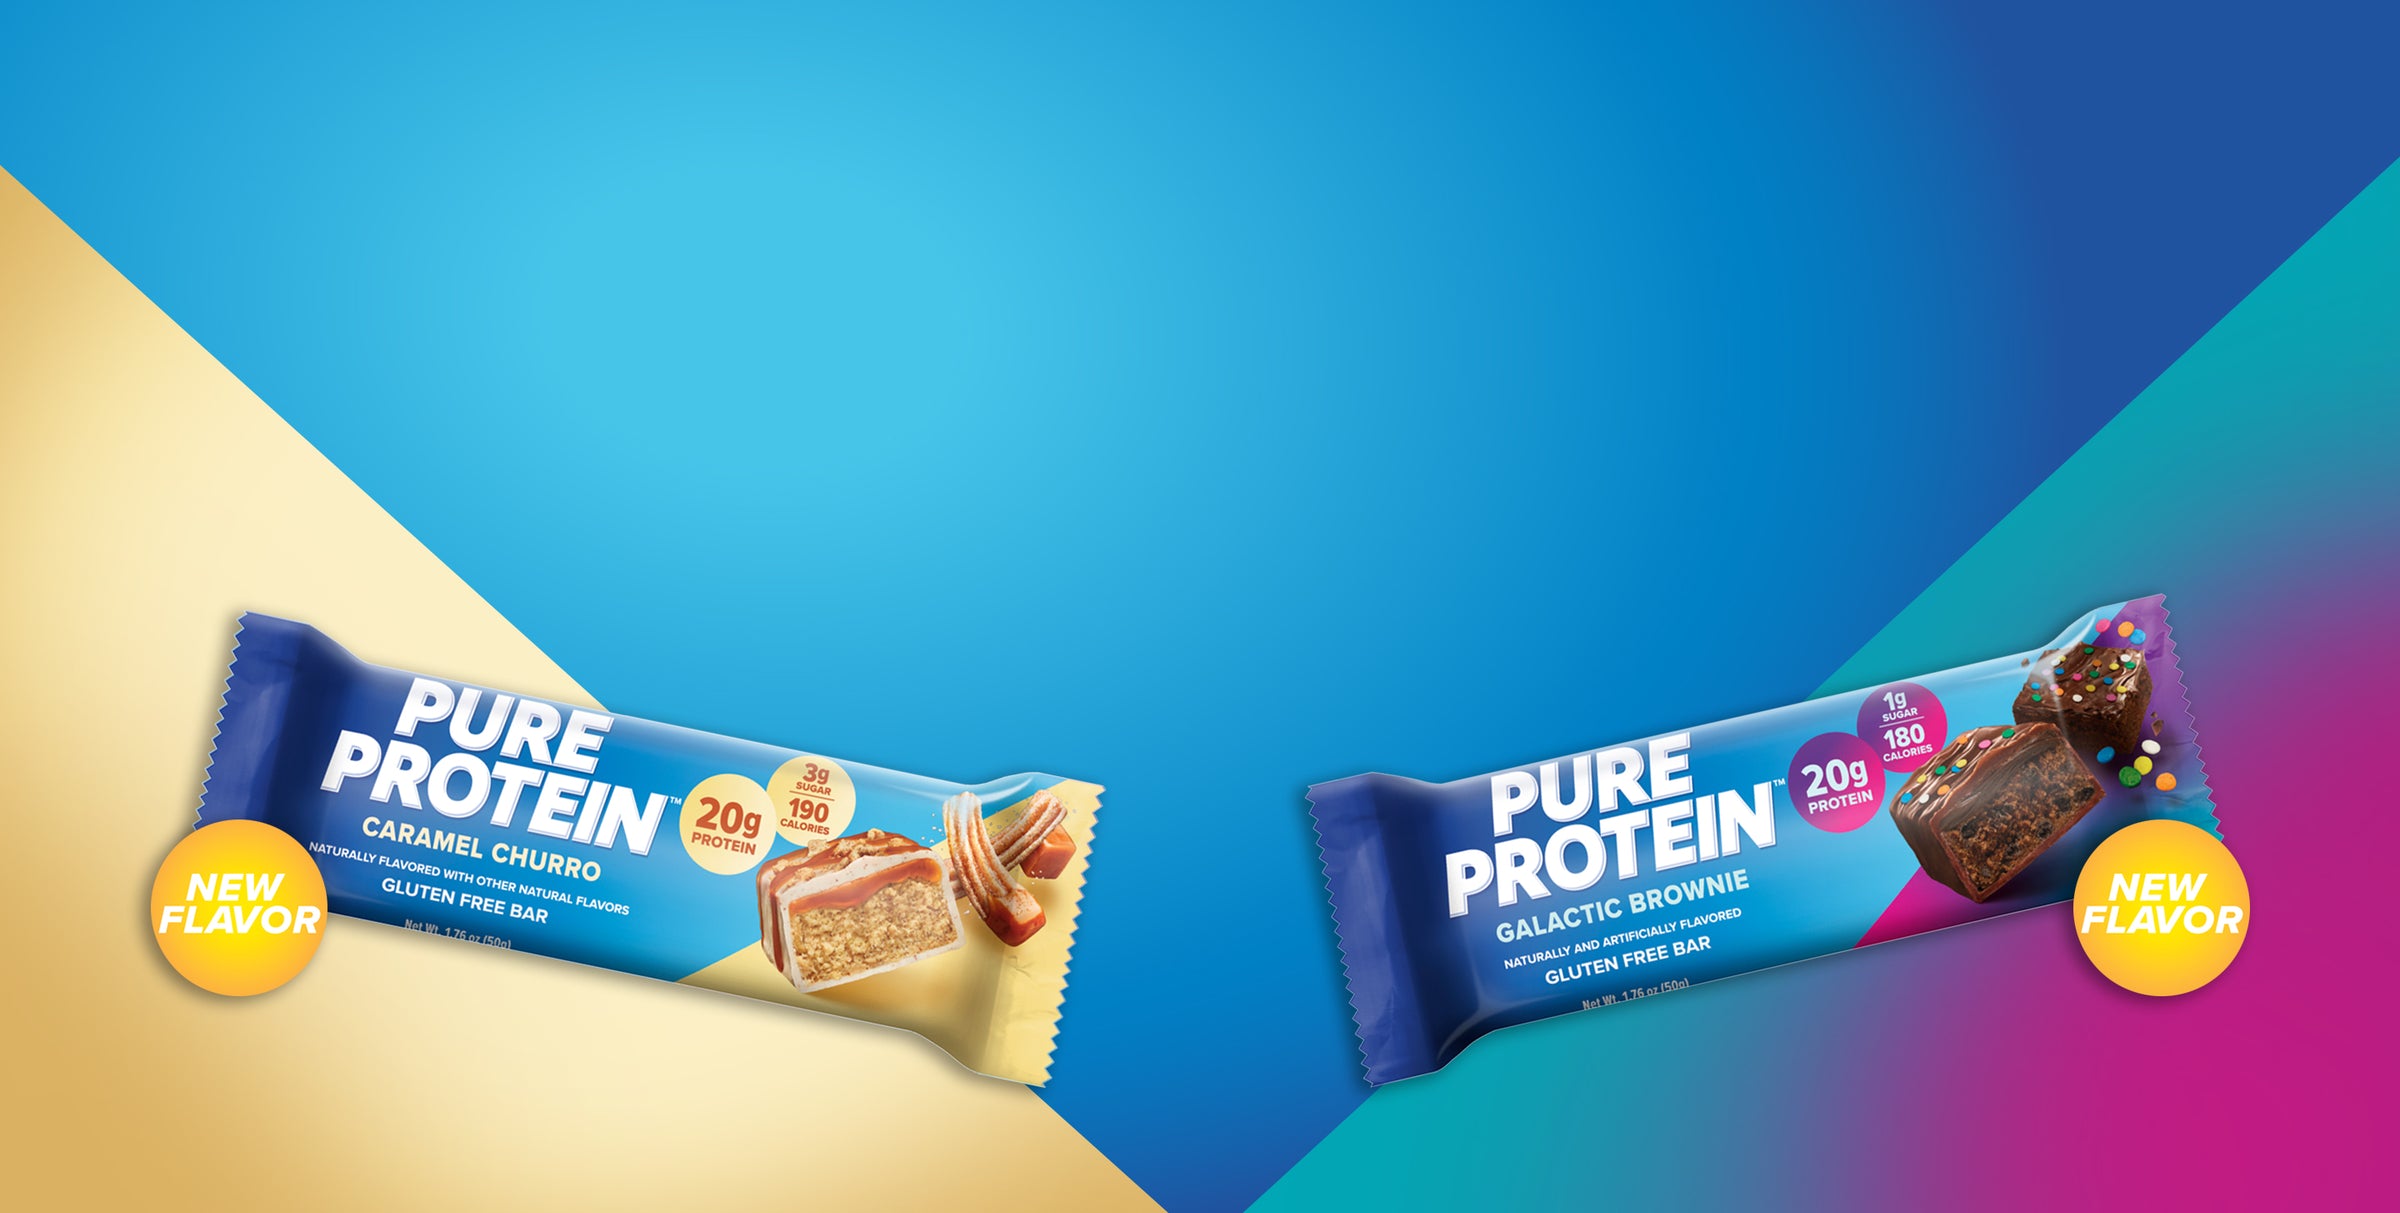 Pure Protein - Protein That's Pro-You!